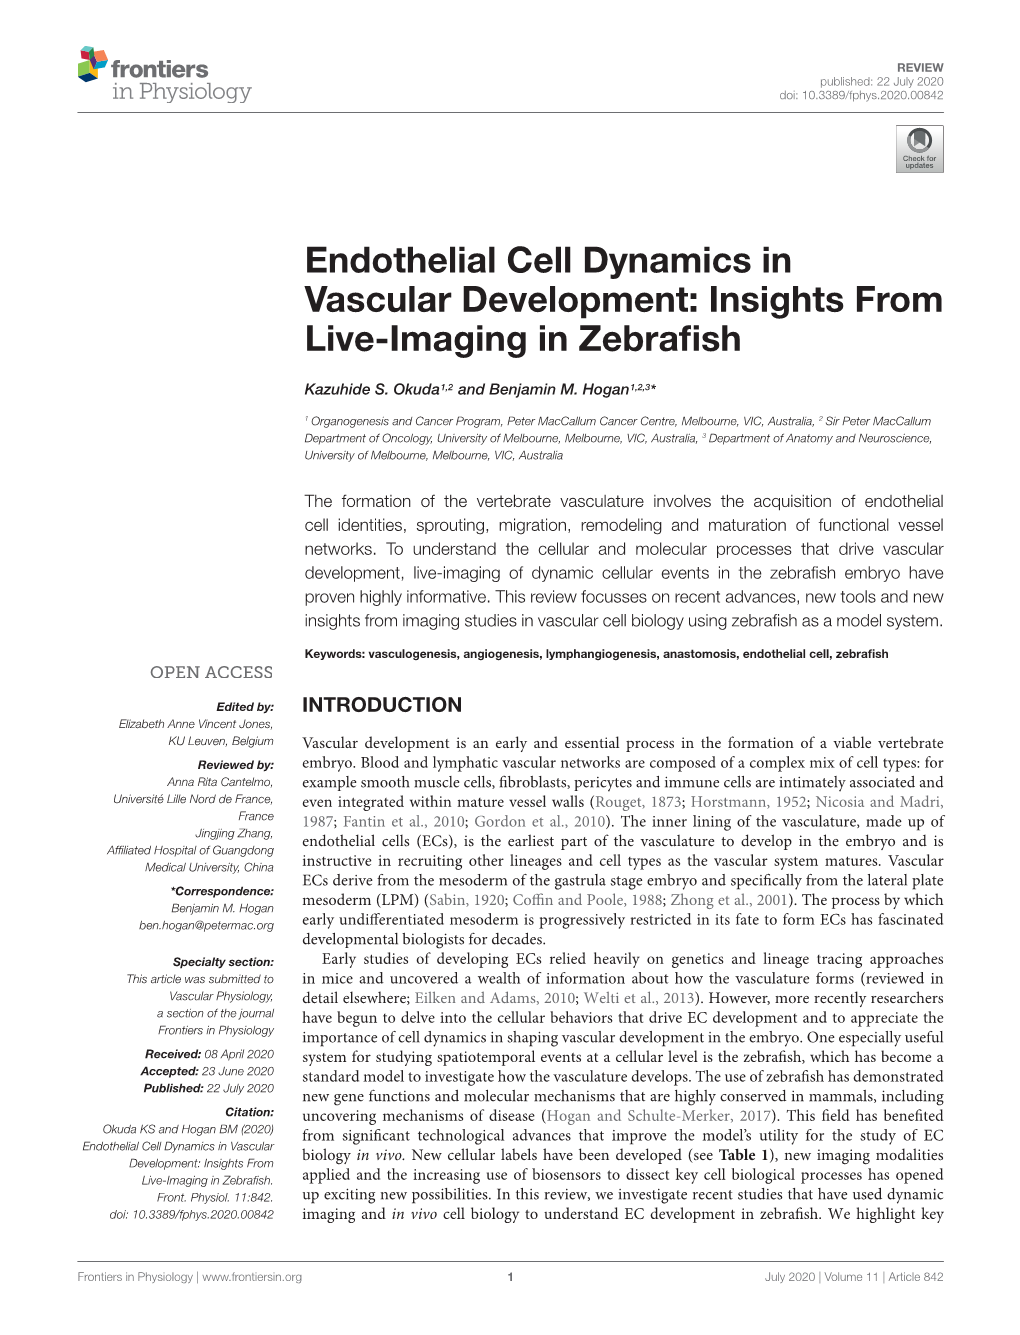 Endothelial Cell Dynamics in Vascular Development: Insights from Live-Imaging in Zebraﬁsh